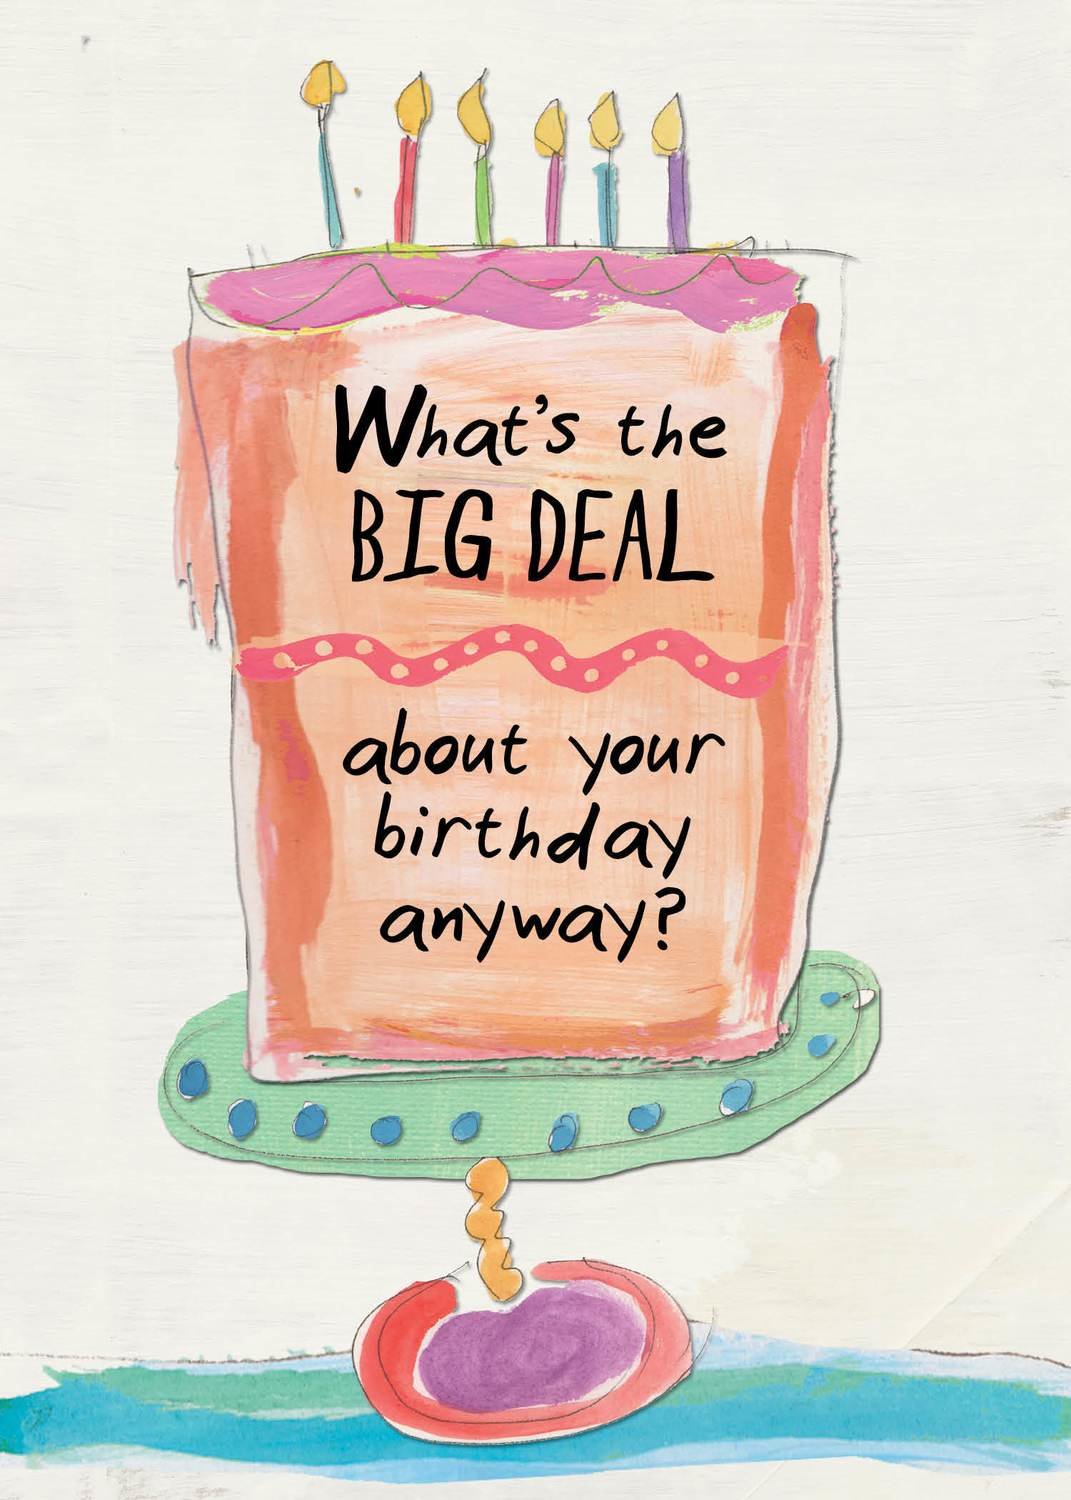 Happy Birthday Hope It's a Big One” Birthday Card - Official The